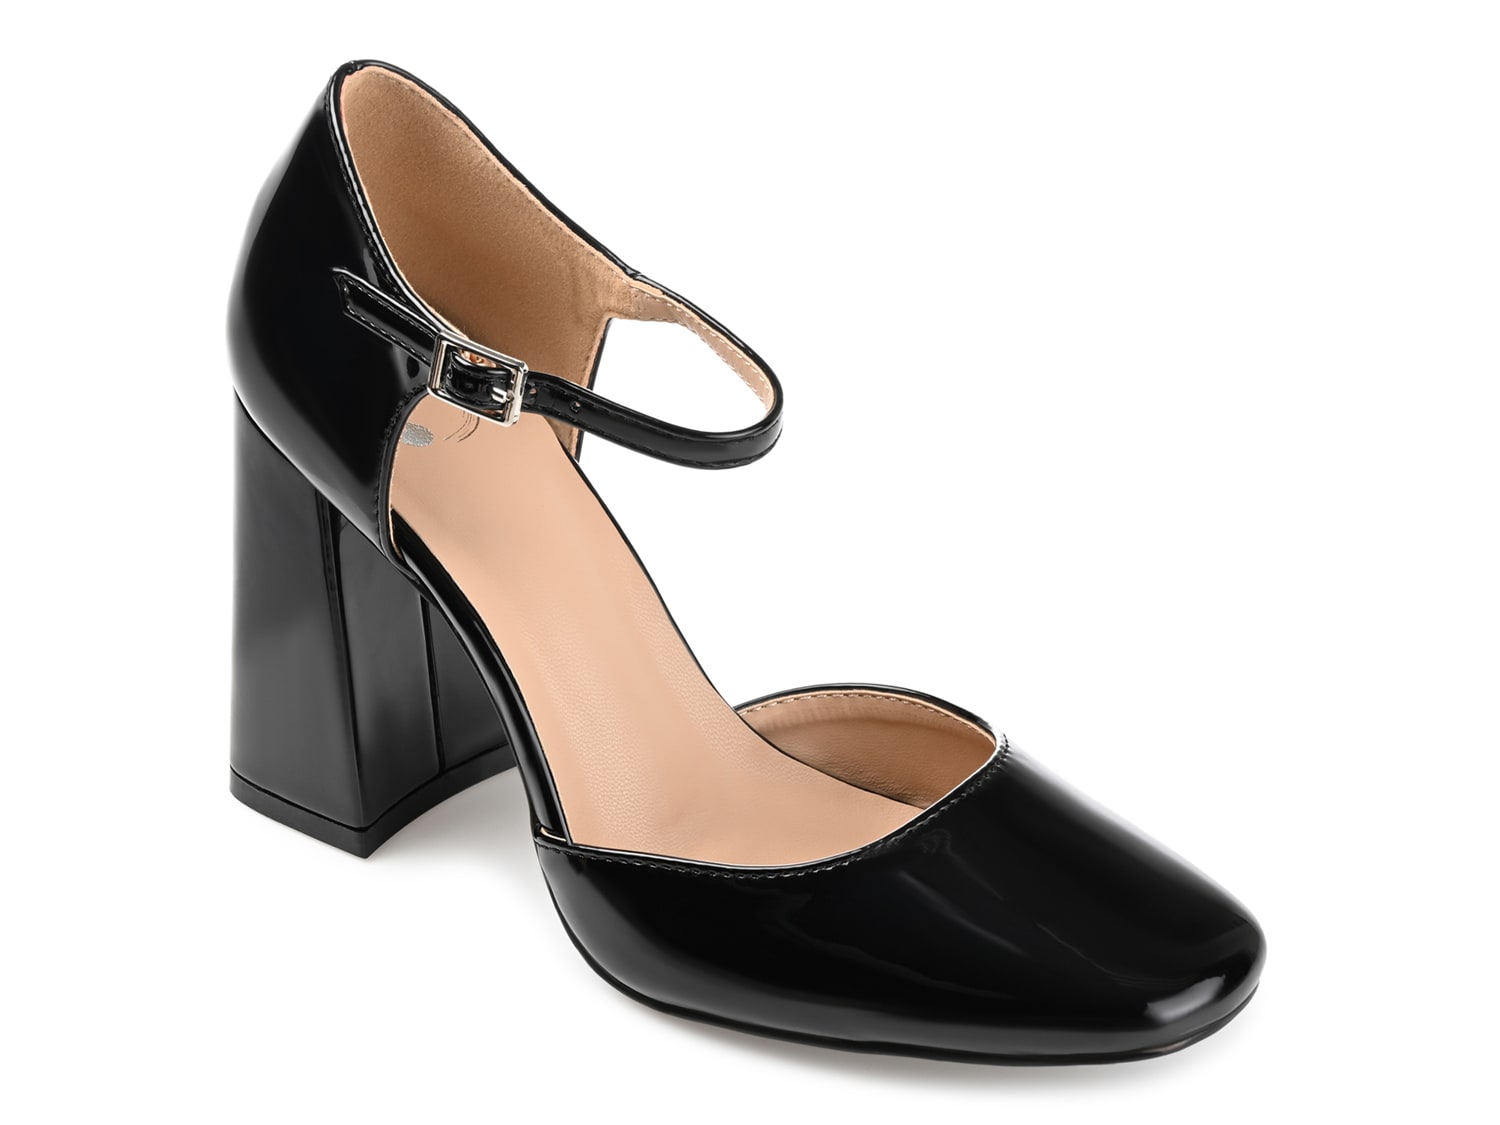 Journee Collection Hesster Pump - Free Shipping | DSW